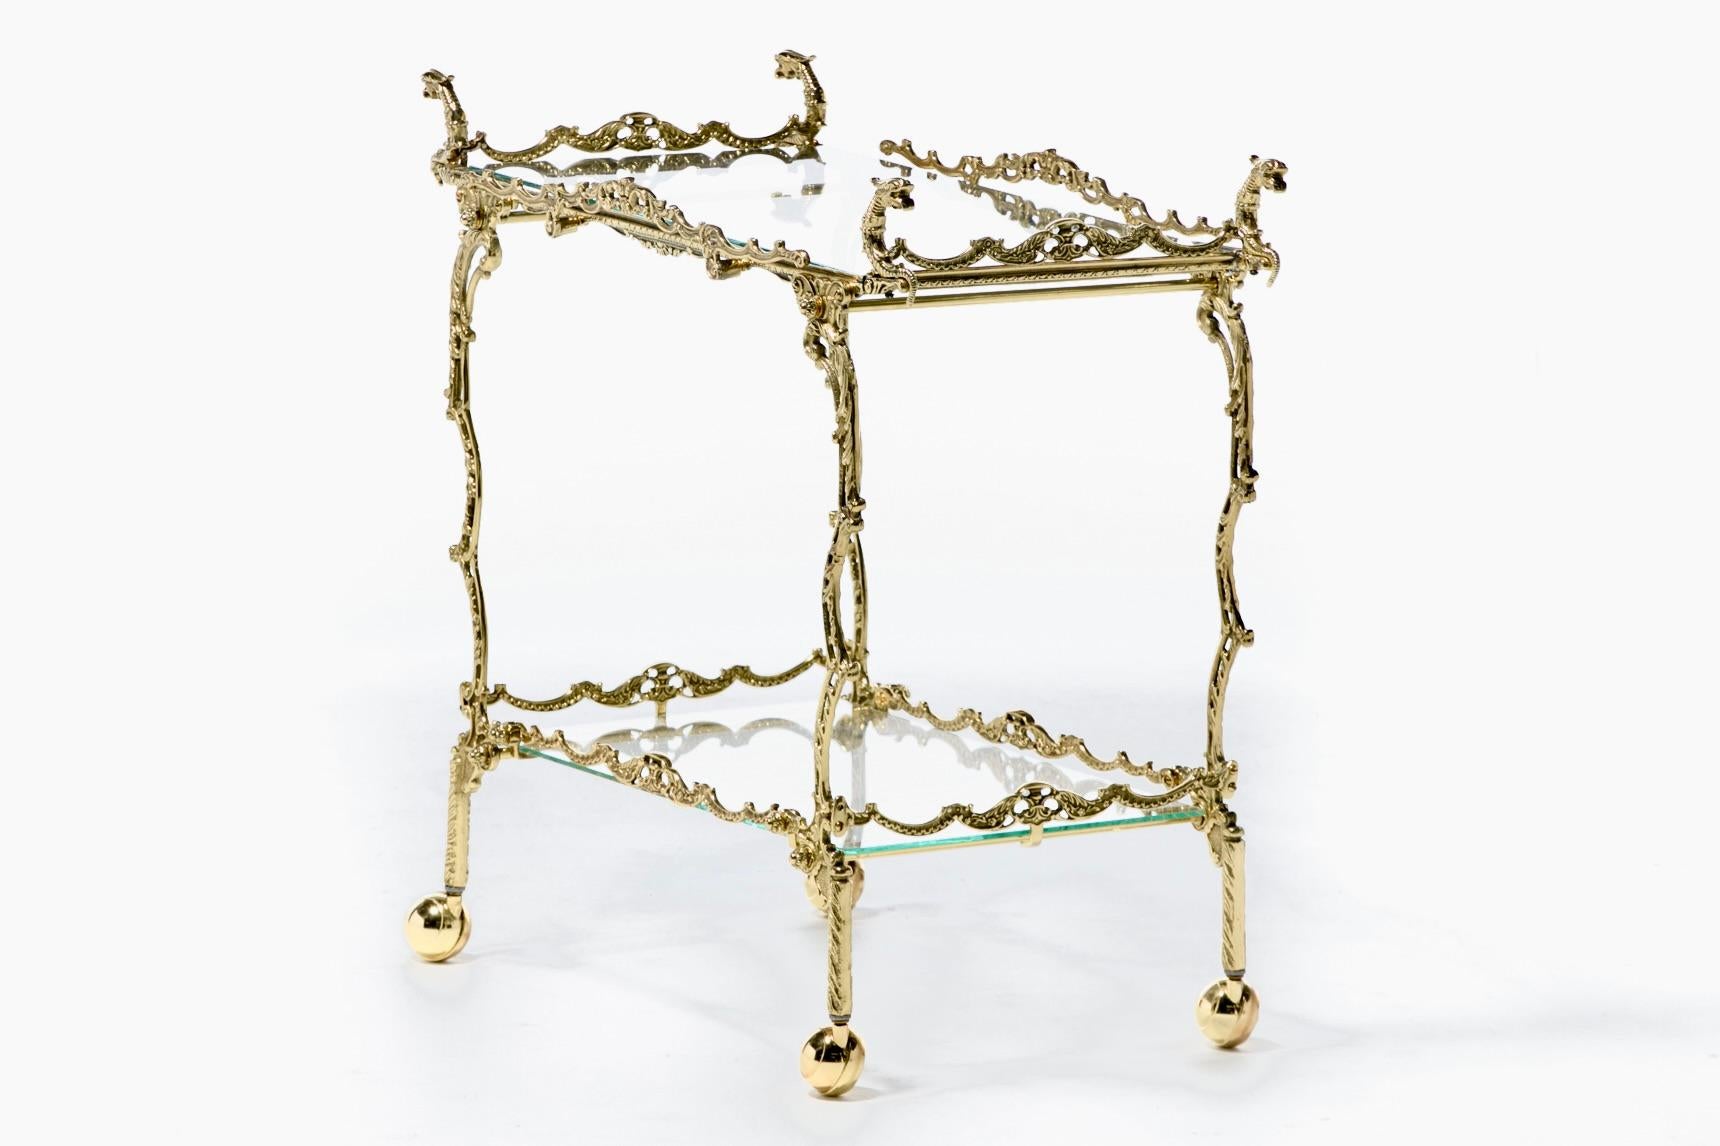 Hollywood Regency Ornate Chinoiserie Polished Brass Bar Cart c. 1955 For Sale 4